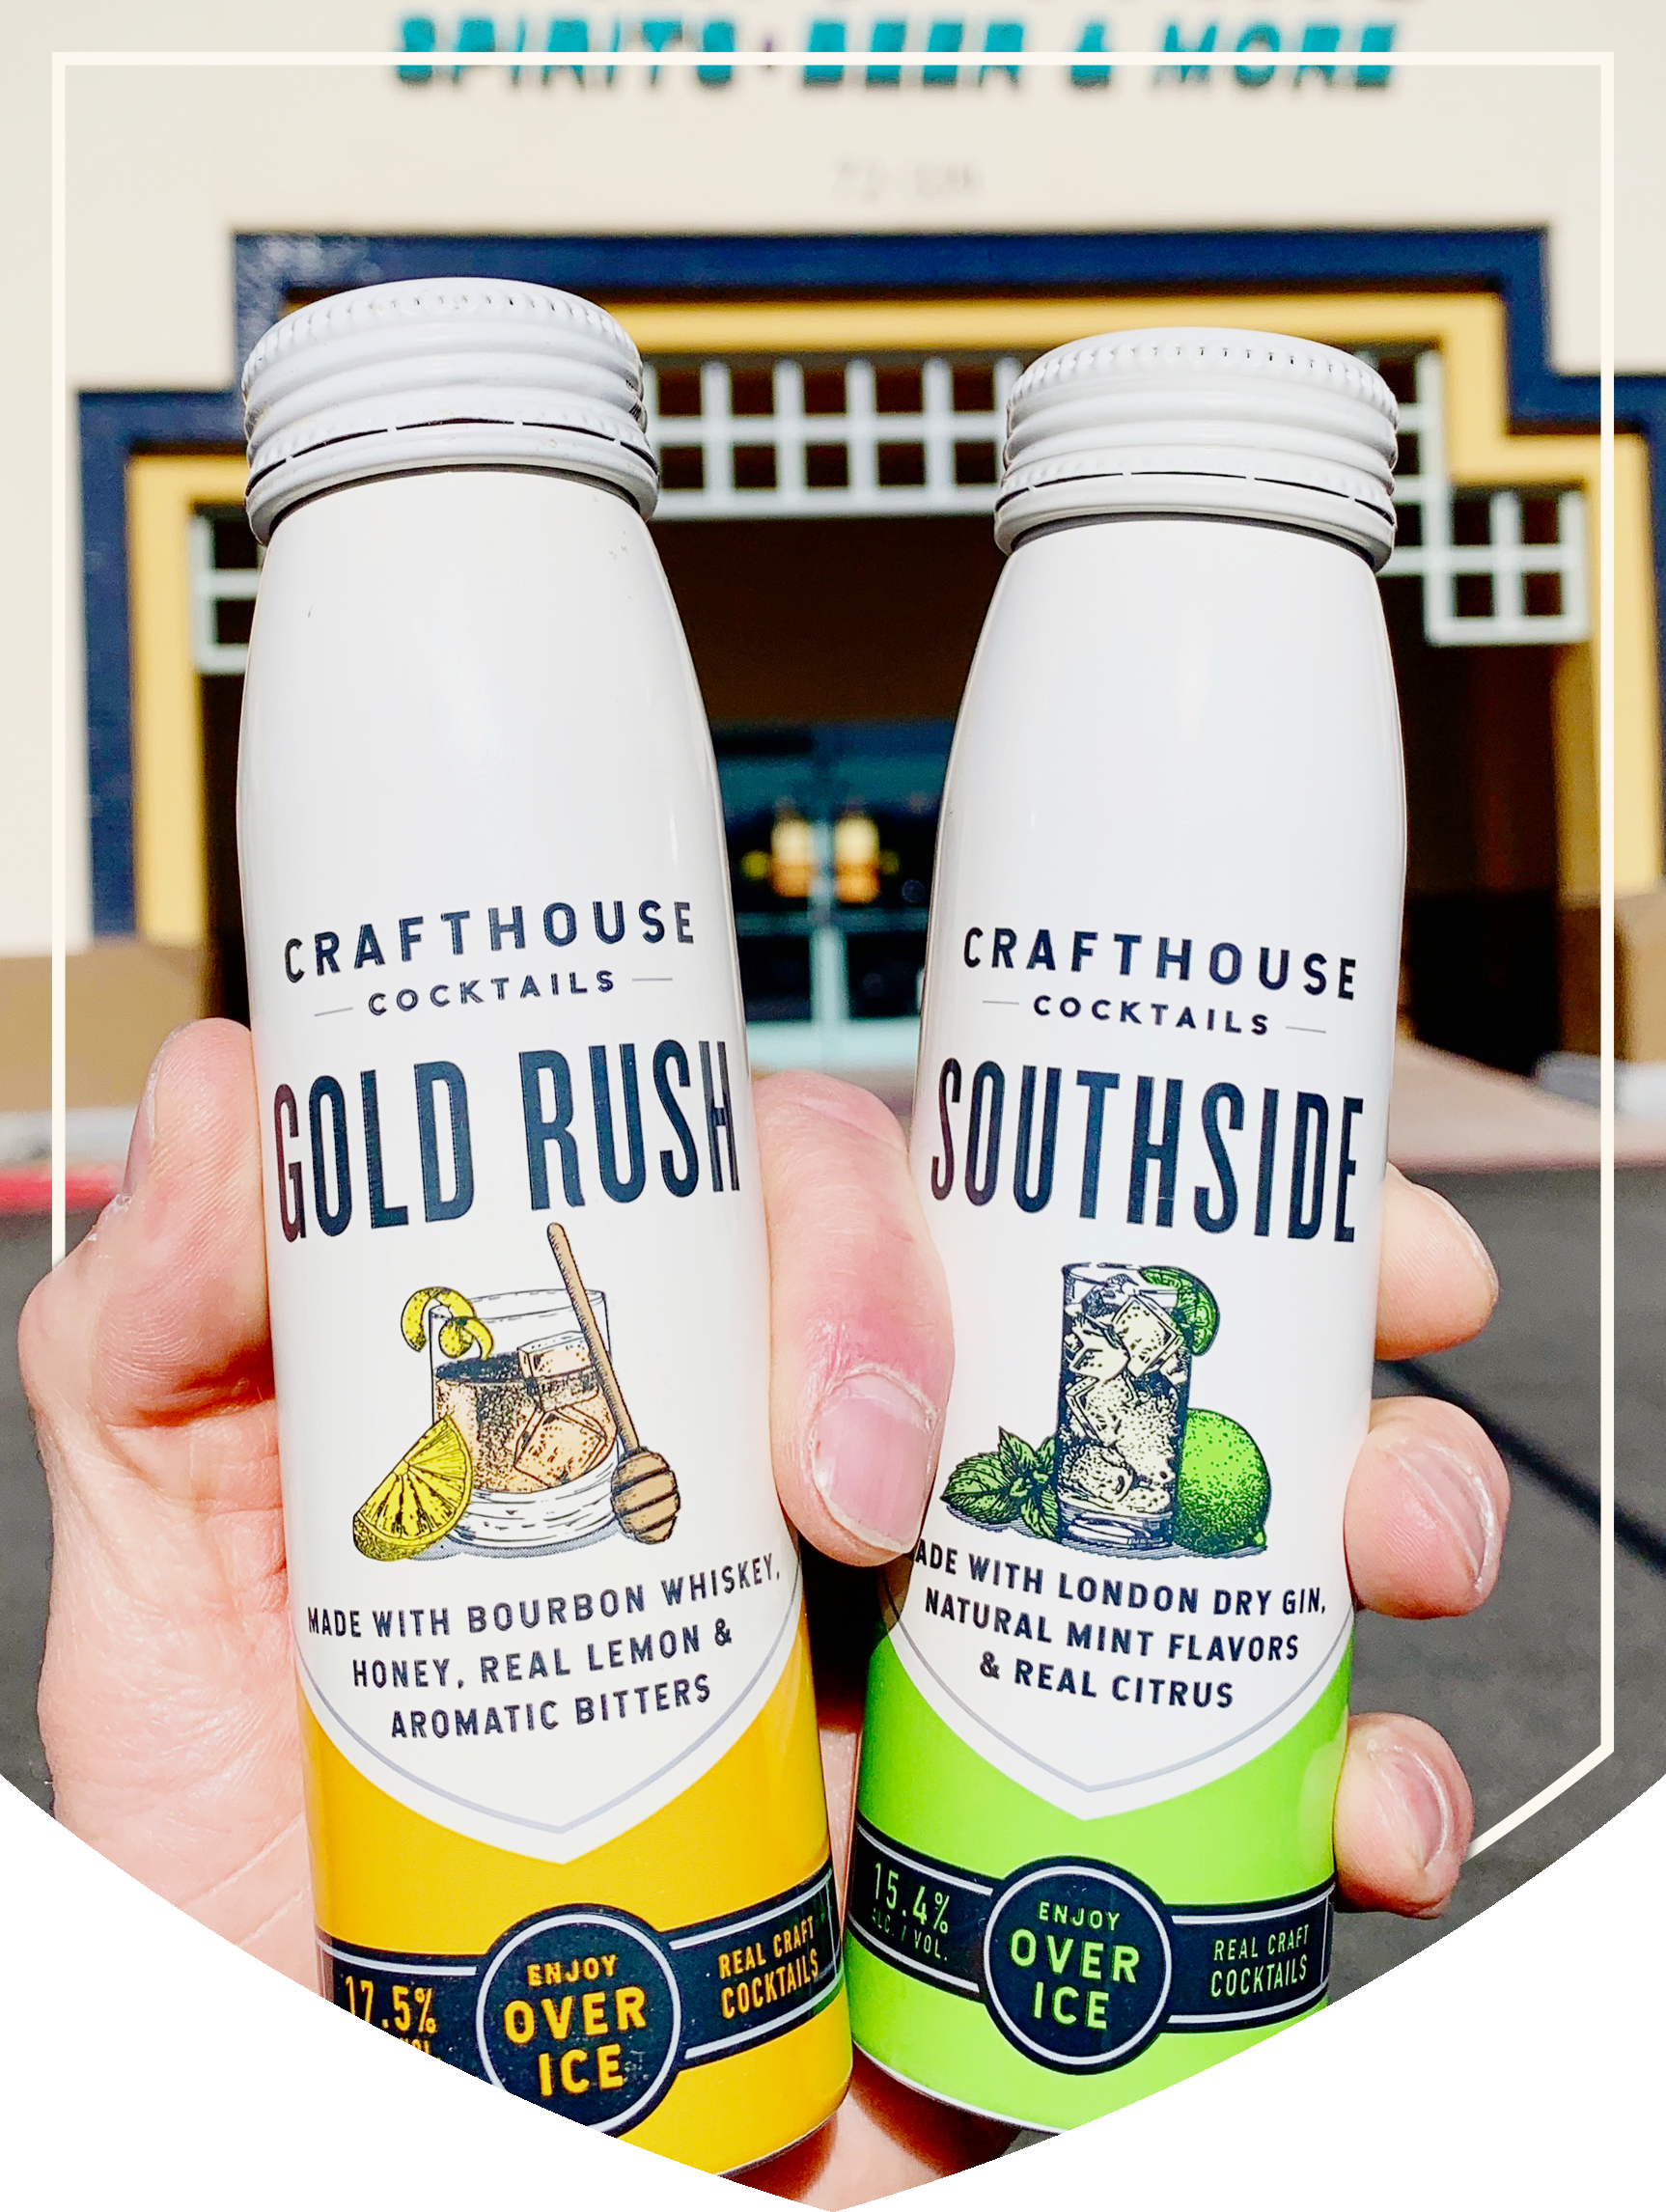 Moscow Mule – Moscow Mule in a Can – Crafthouse Cocktails — Crafthouse  Cocktails